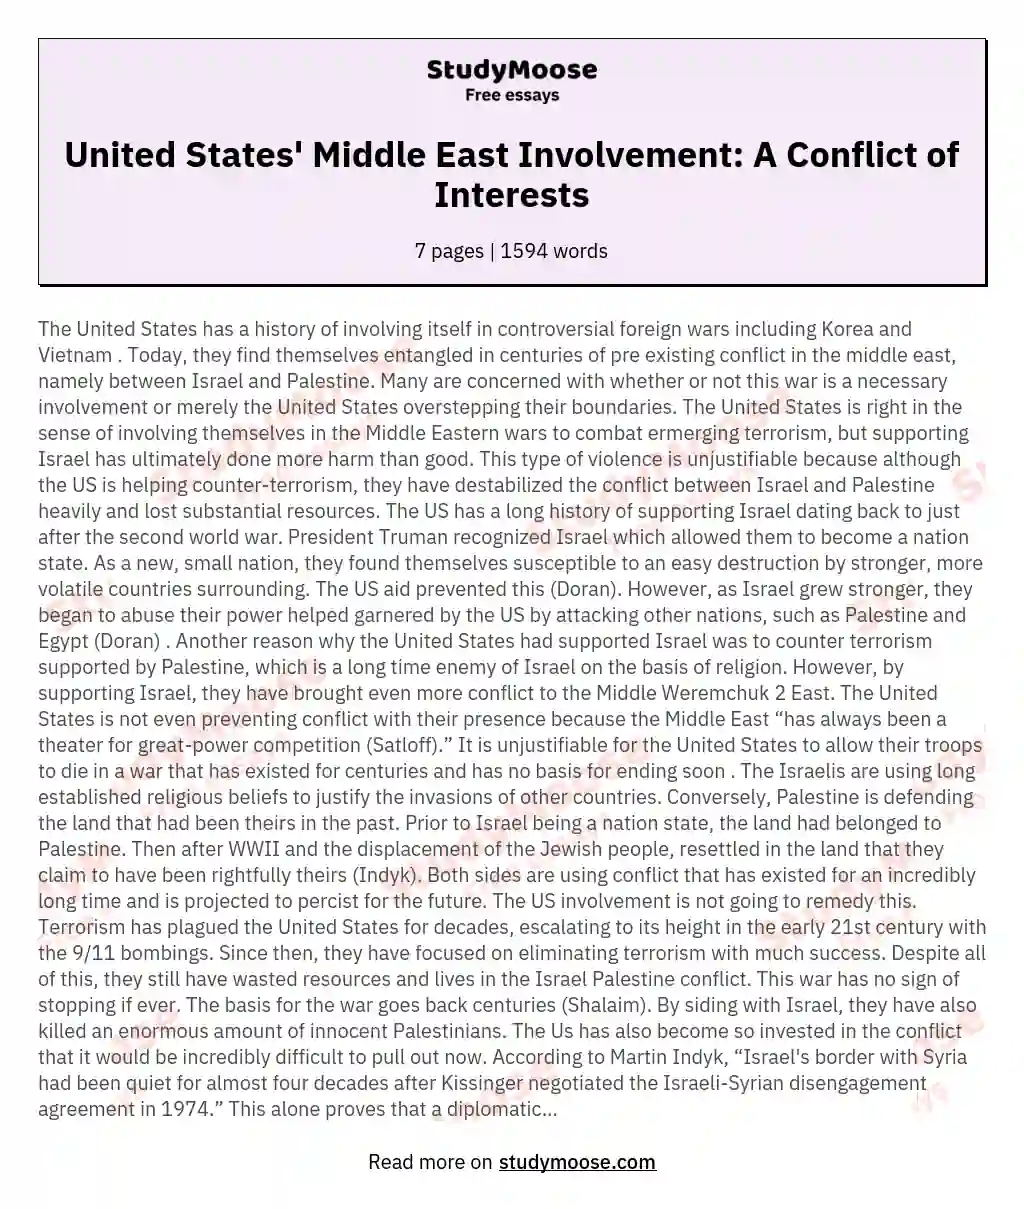 United States' Middle East Involvement: A Conflict of Interests essay